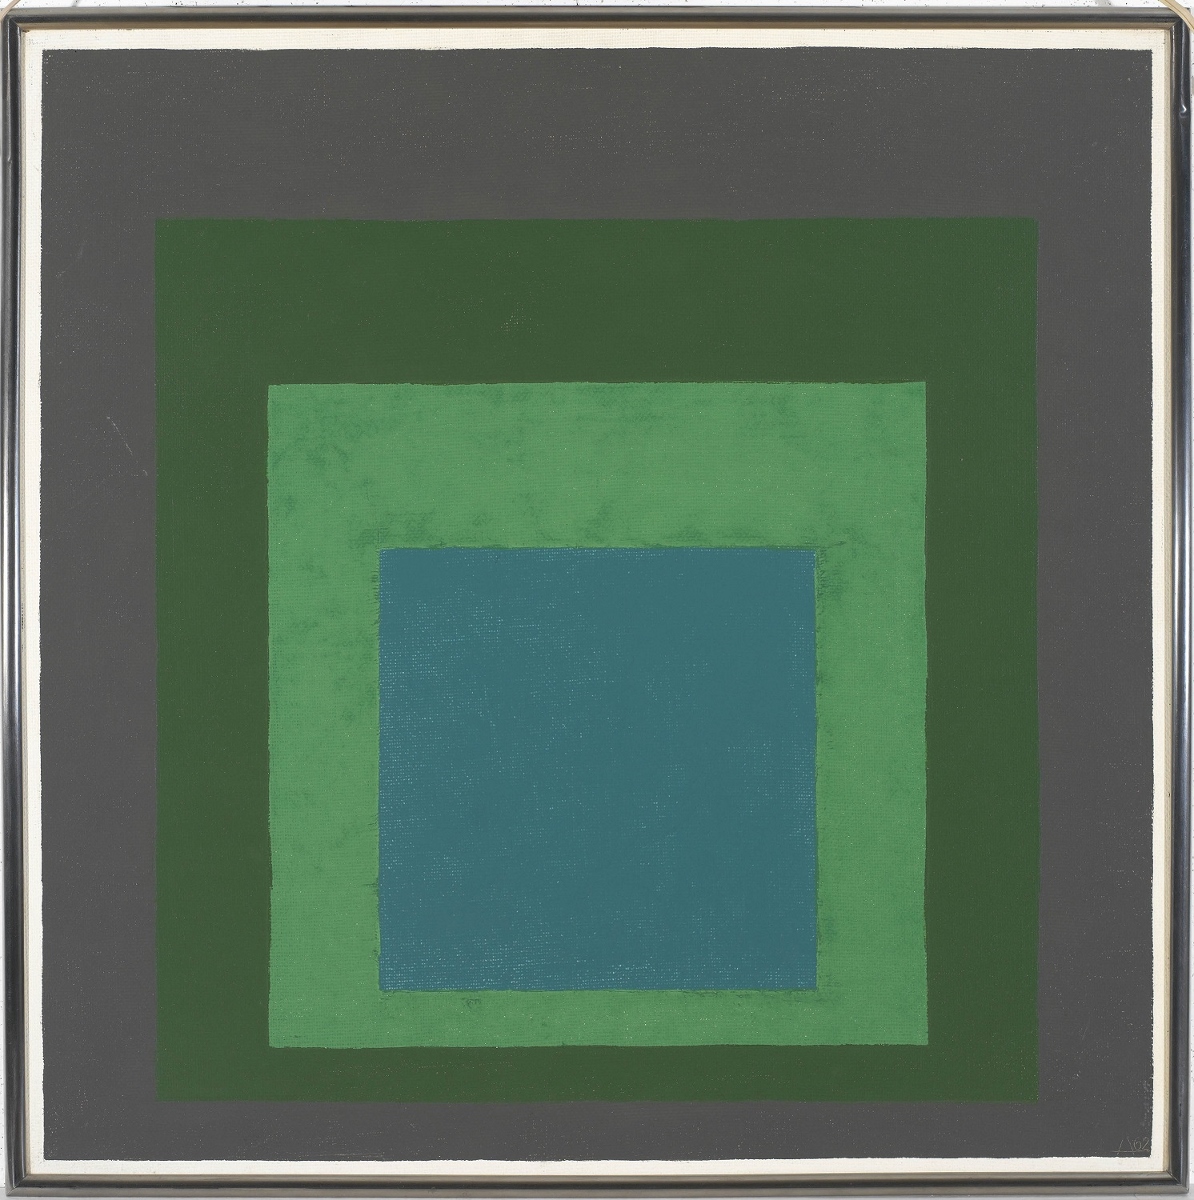 Josef and Anni Albers – Voyage inside a blind experience